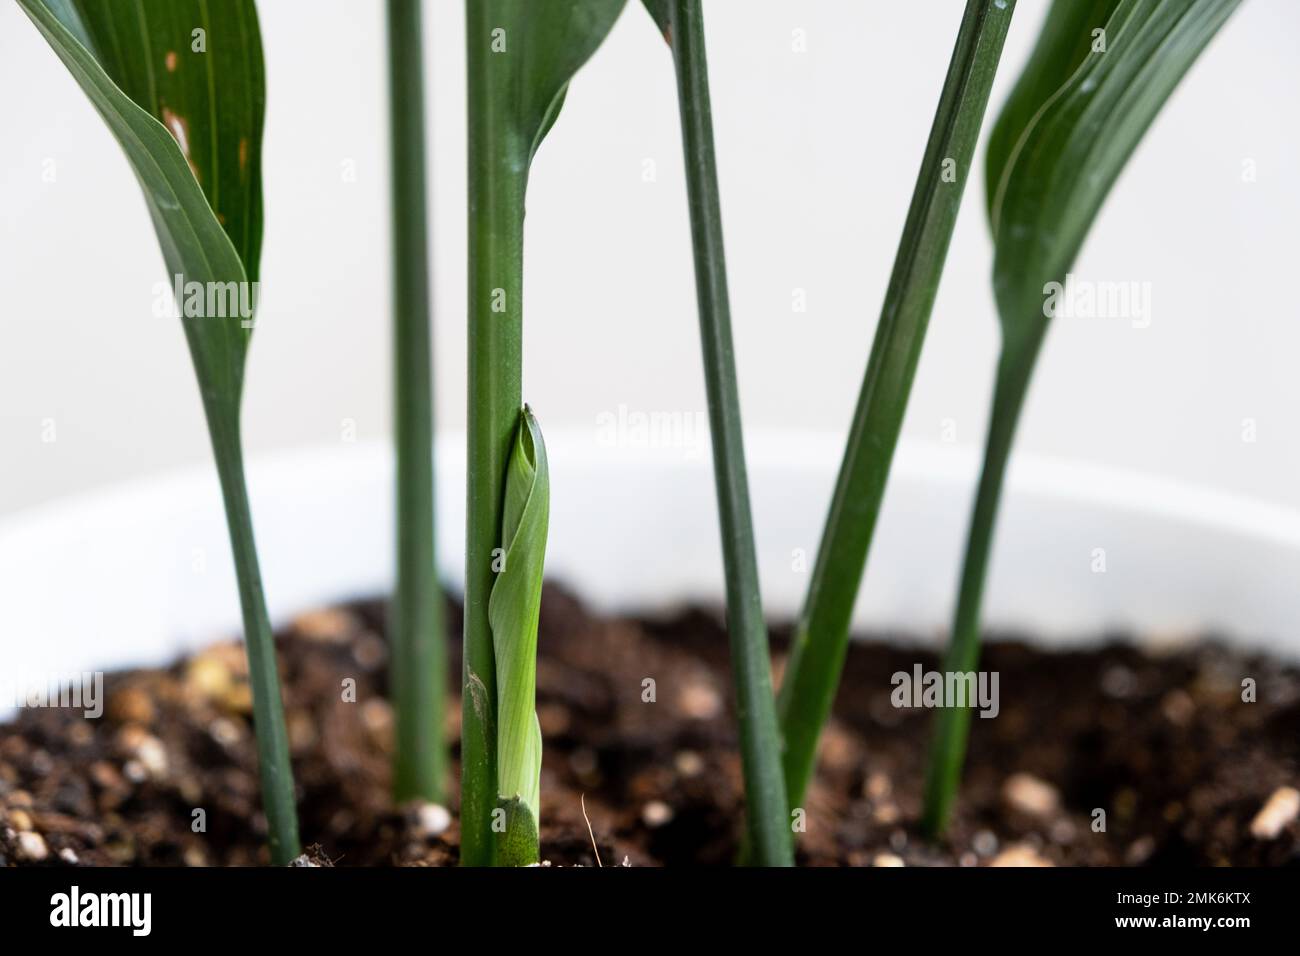 A new sprout of aspidistra close-up. A houseplant with stiff leaves and growing out of the ground. Stock Photo